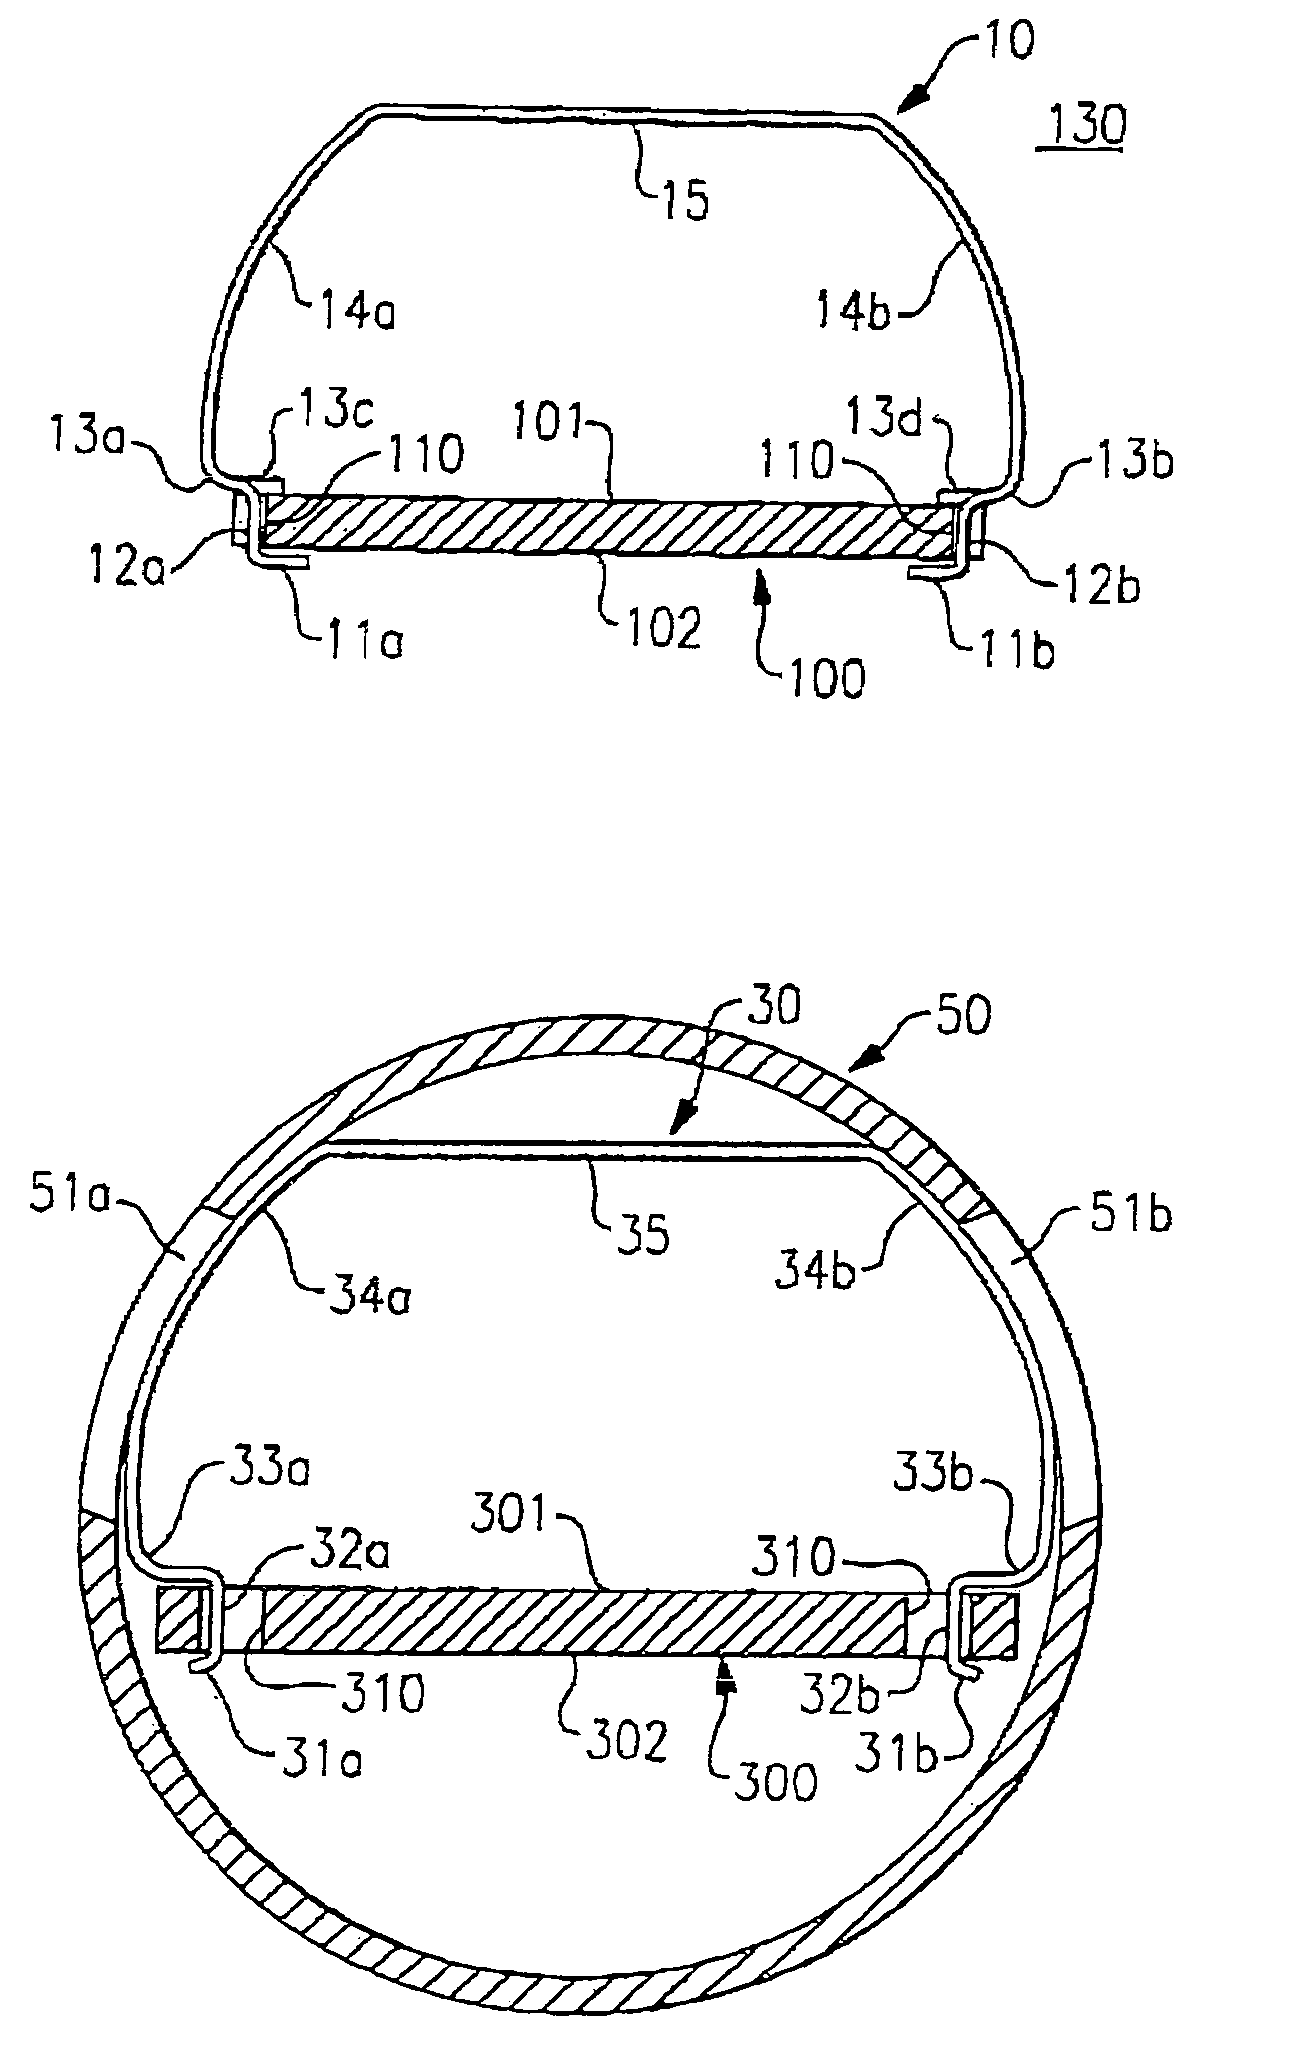 Circuit board sub-assemblies, methods for manufacturing same, electronic signal filters including same, and methods, for manufacturing electronic signal filters including same